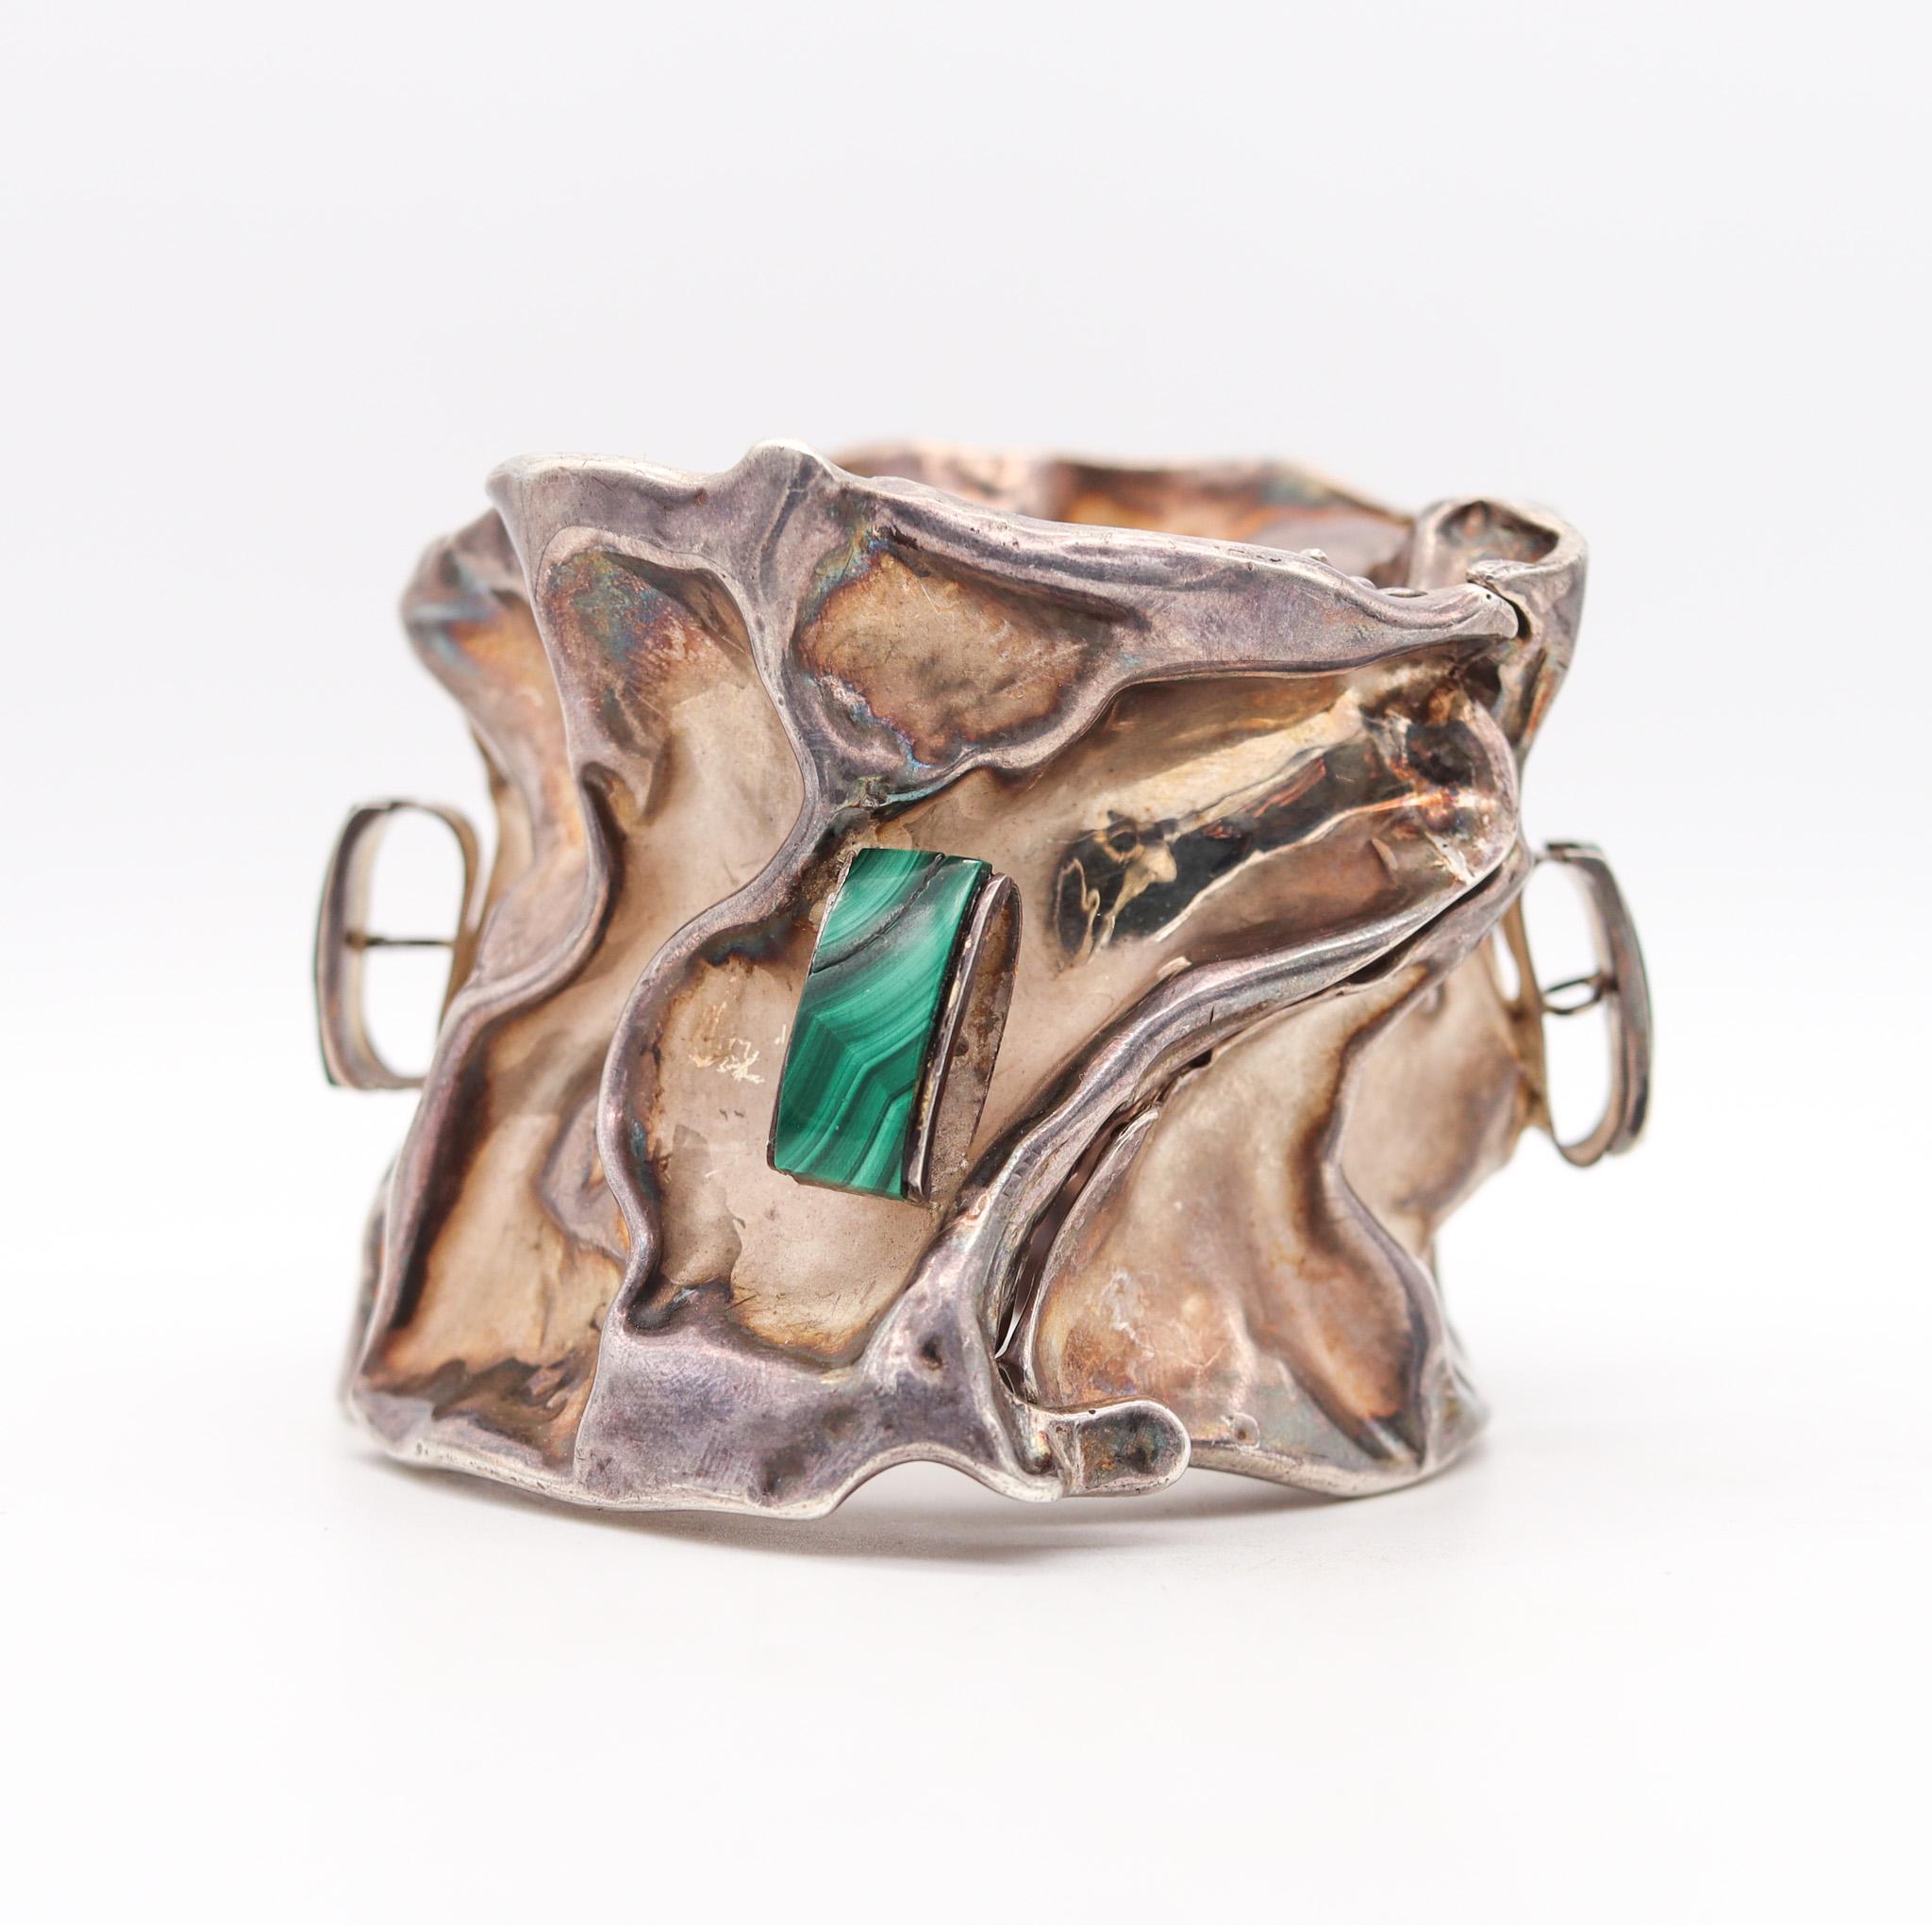 Modernist Misty Taylor 1970 Taxco Organic Bangle In .980 Sterling Silver With Malachite For Sale